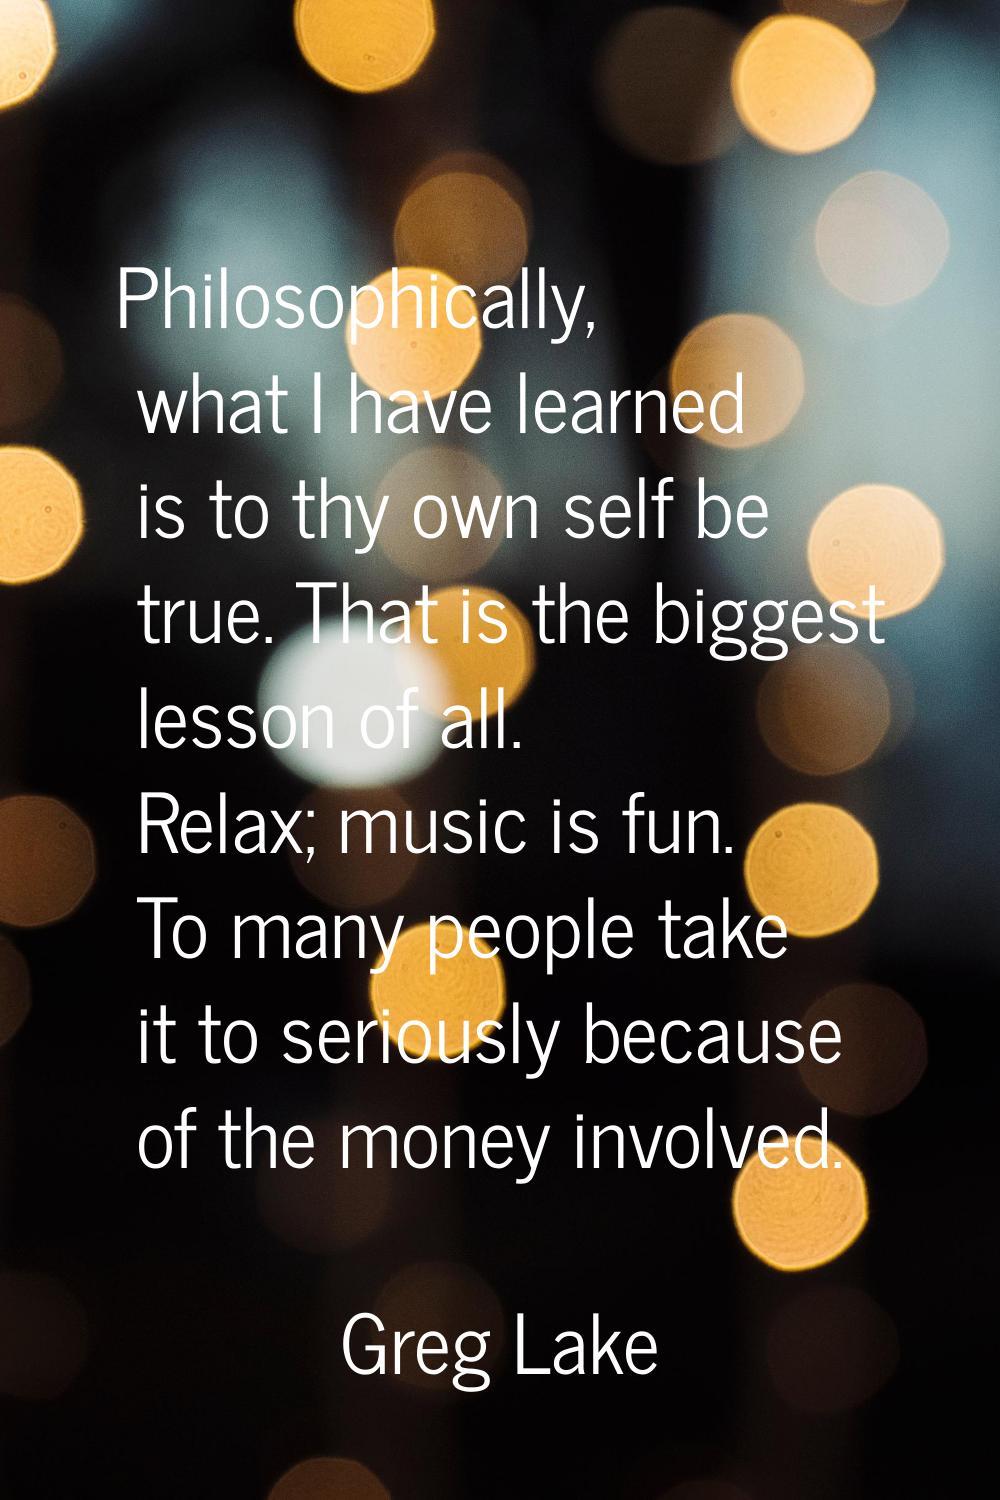 Philosophically, what I have learned is to thy own self be true. That is the biggest lesson of all.